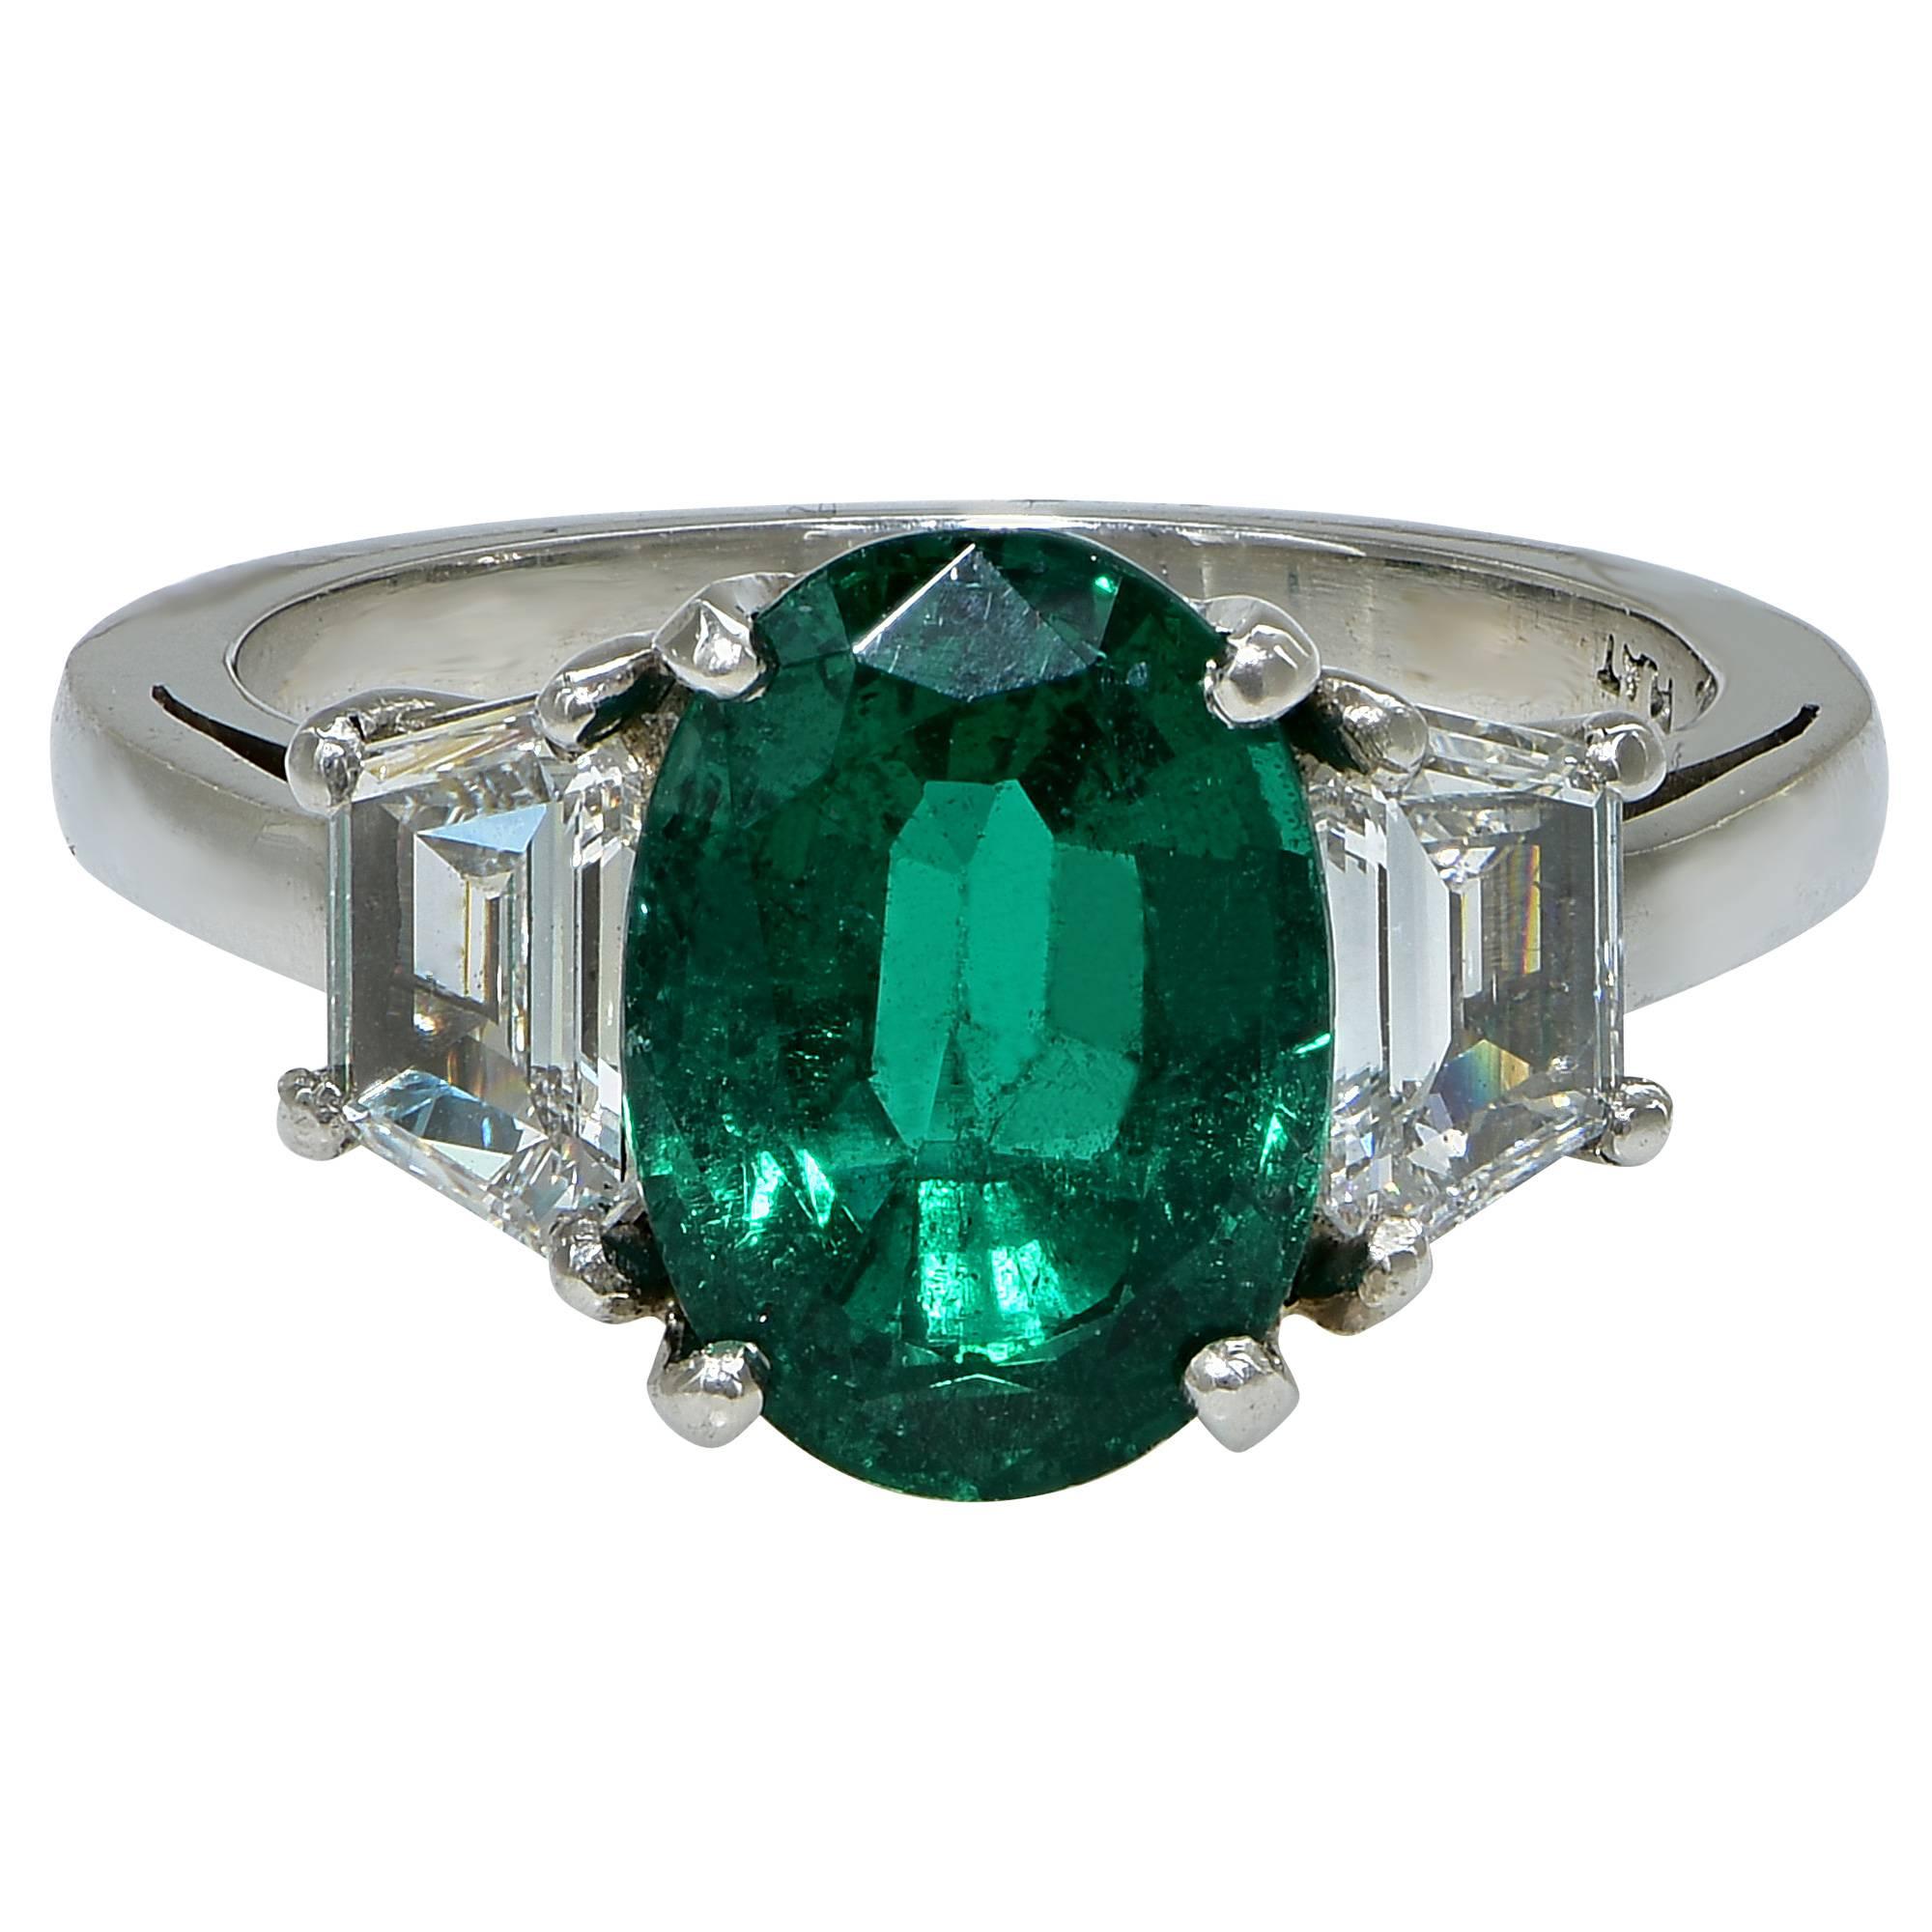 Beautiful rich green AGL graded 2.75ct oval cut emerald flanked by two trapezoid cut diamonds set in a modern platinum engagement ring.

The ring is a size 6.5 and can be sized up or down.
Measurements are available upon request.
It is stamped